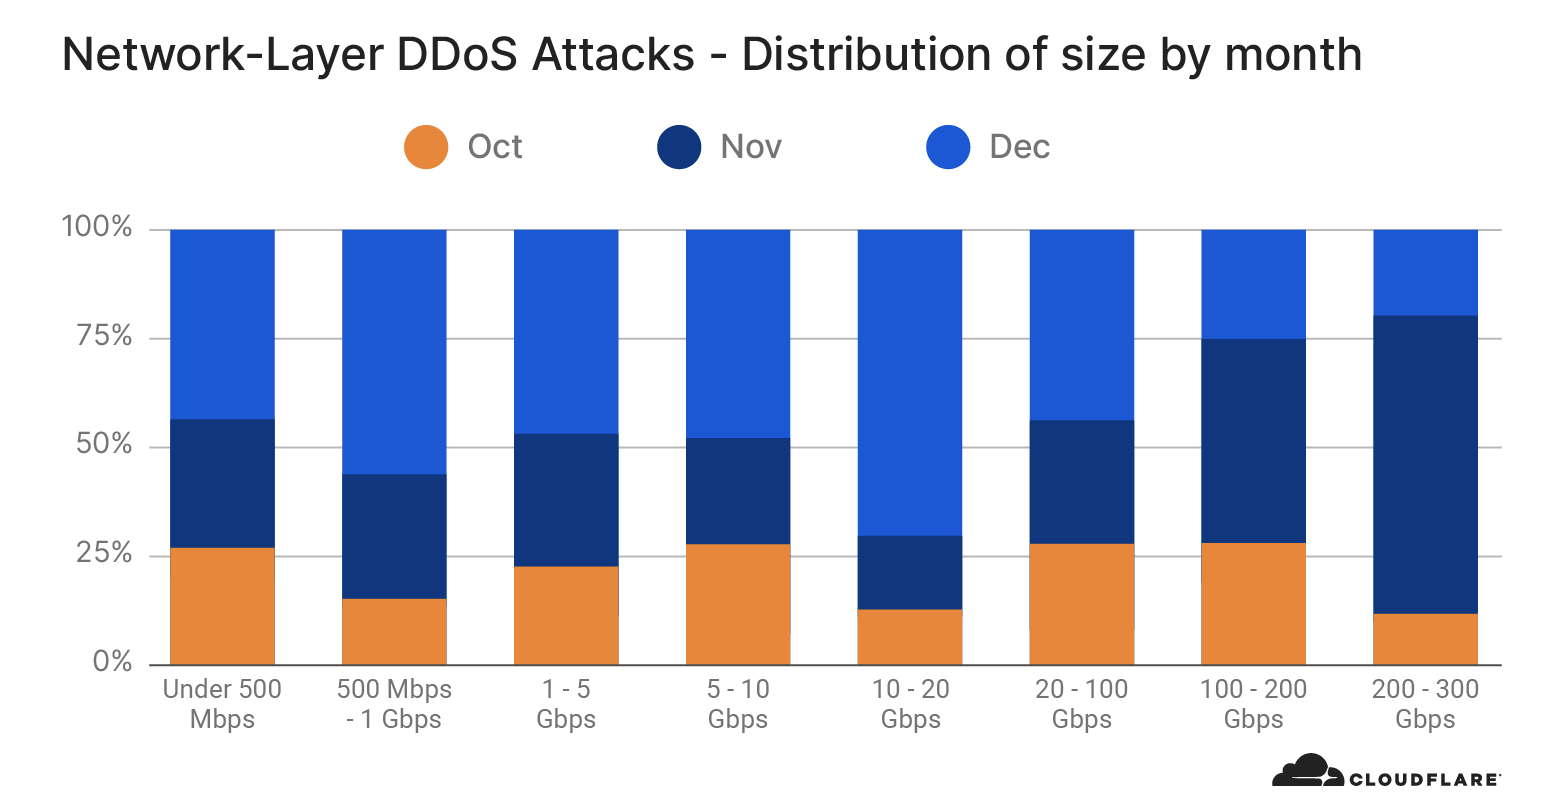 Network-layer DDoS attack trends for Q4 2020